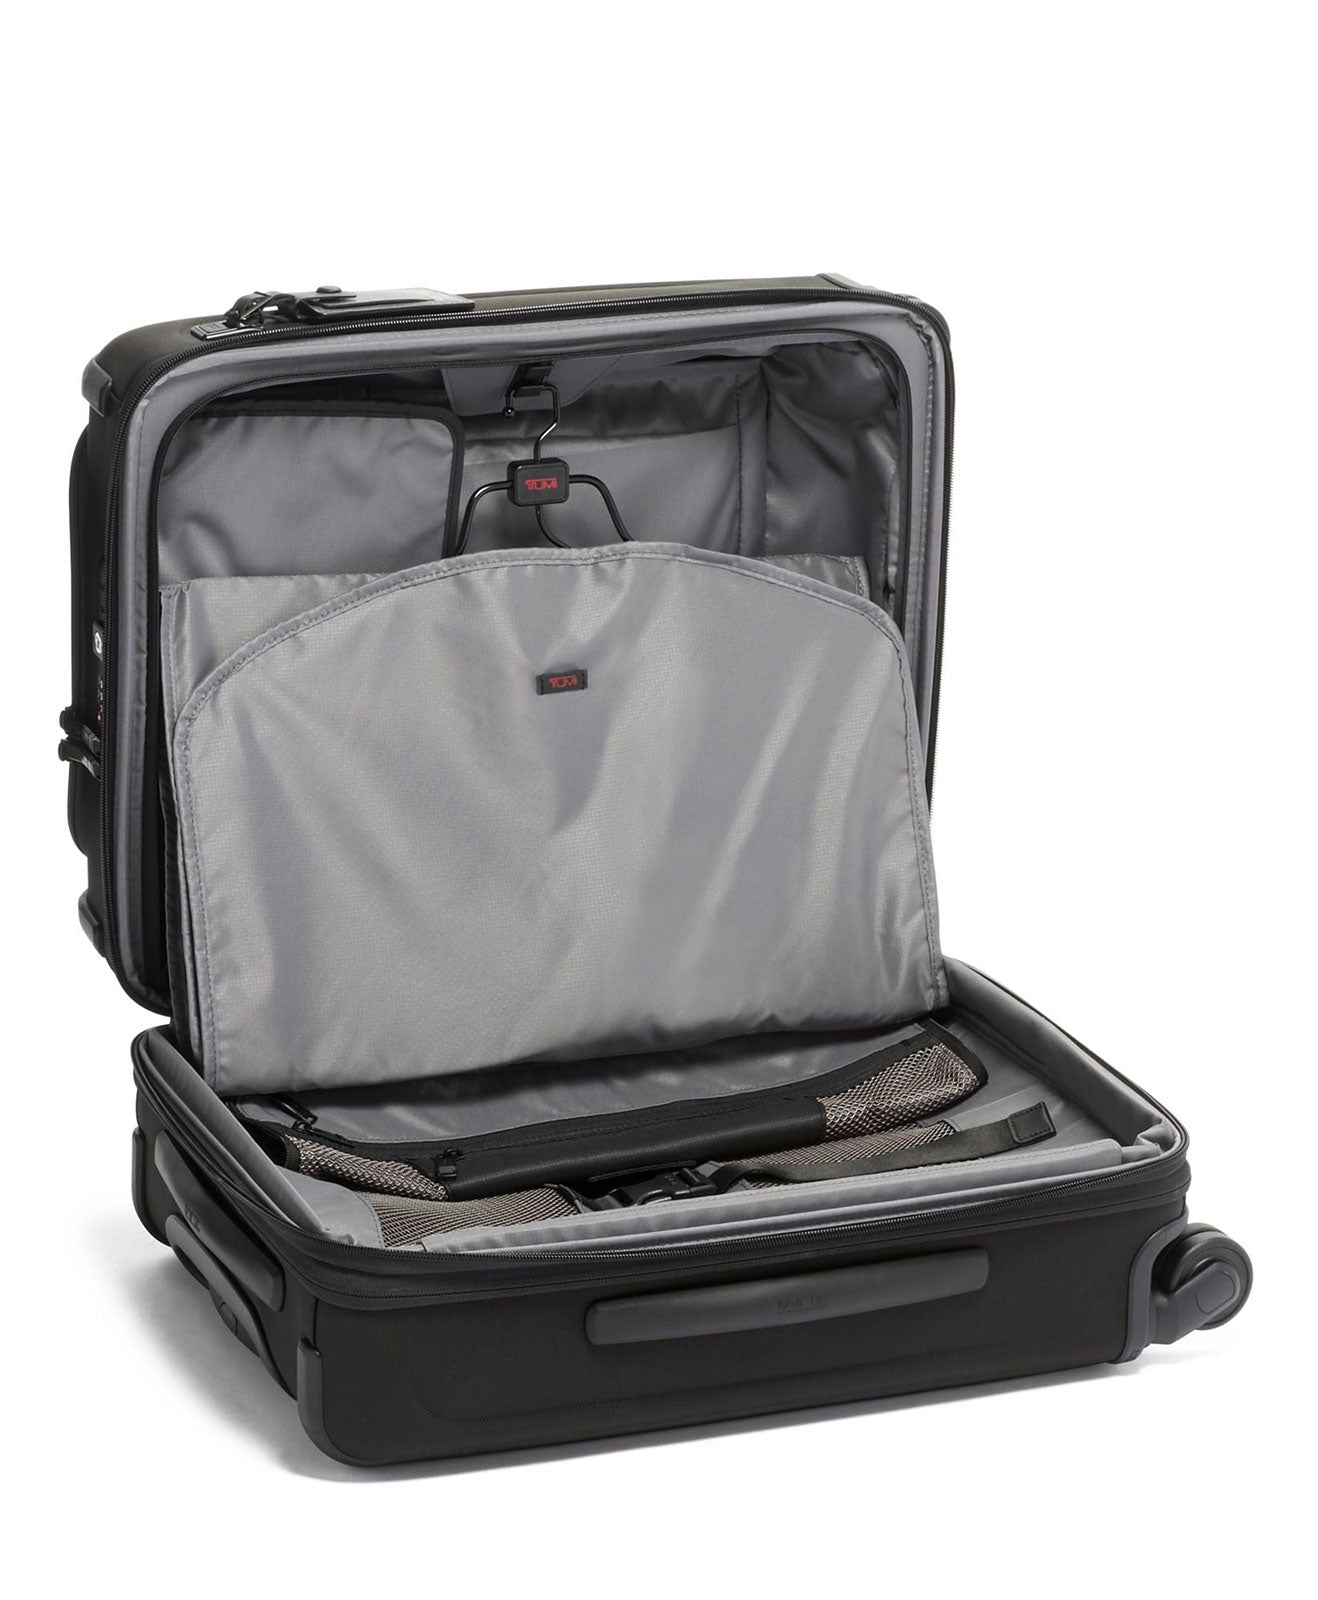 Tumi Continental Dual Access 4 Wheeled Carry-On, Black